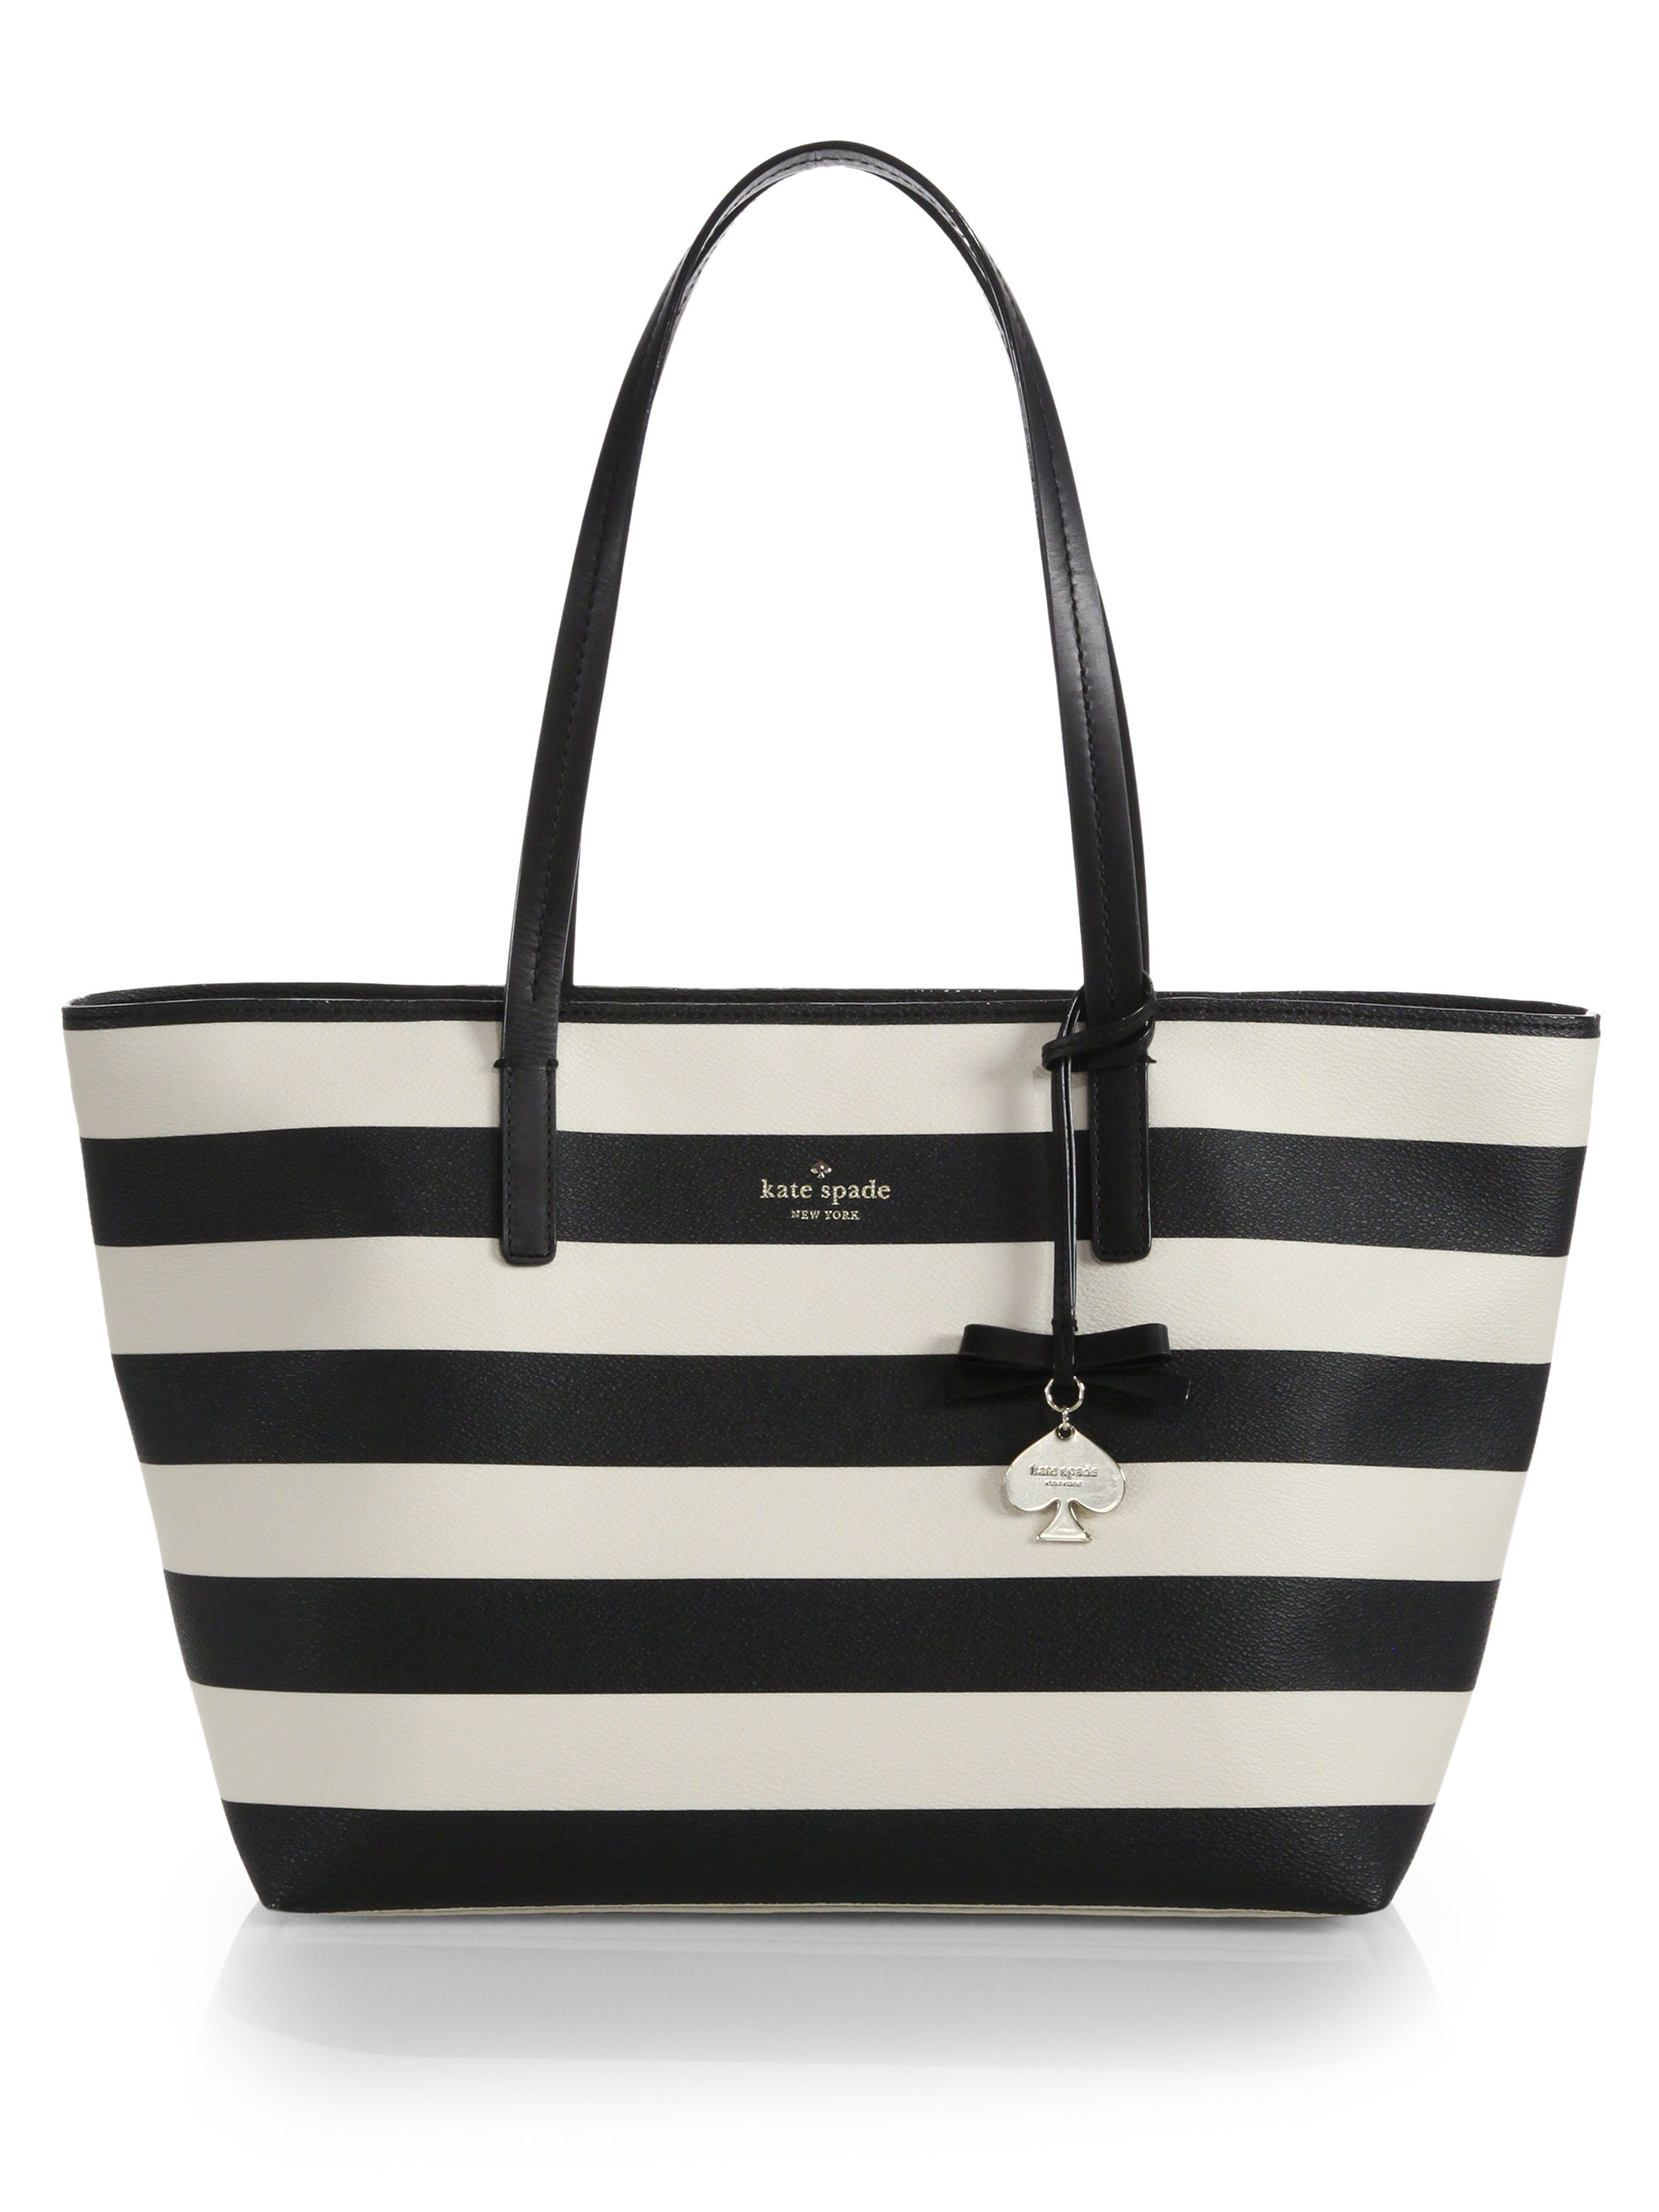 Lyst - Kate spade new york Hawthorne Lane Striped Faux-Leather Tote in ...